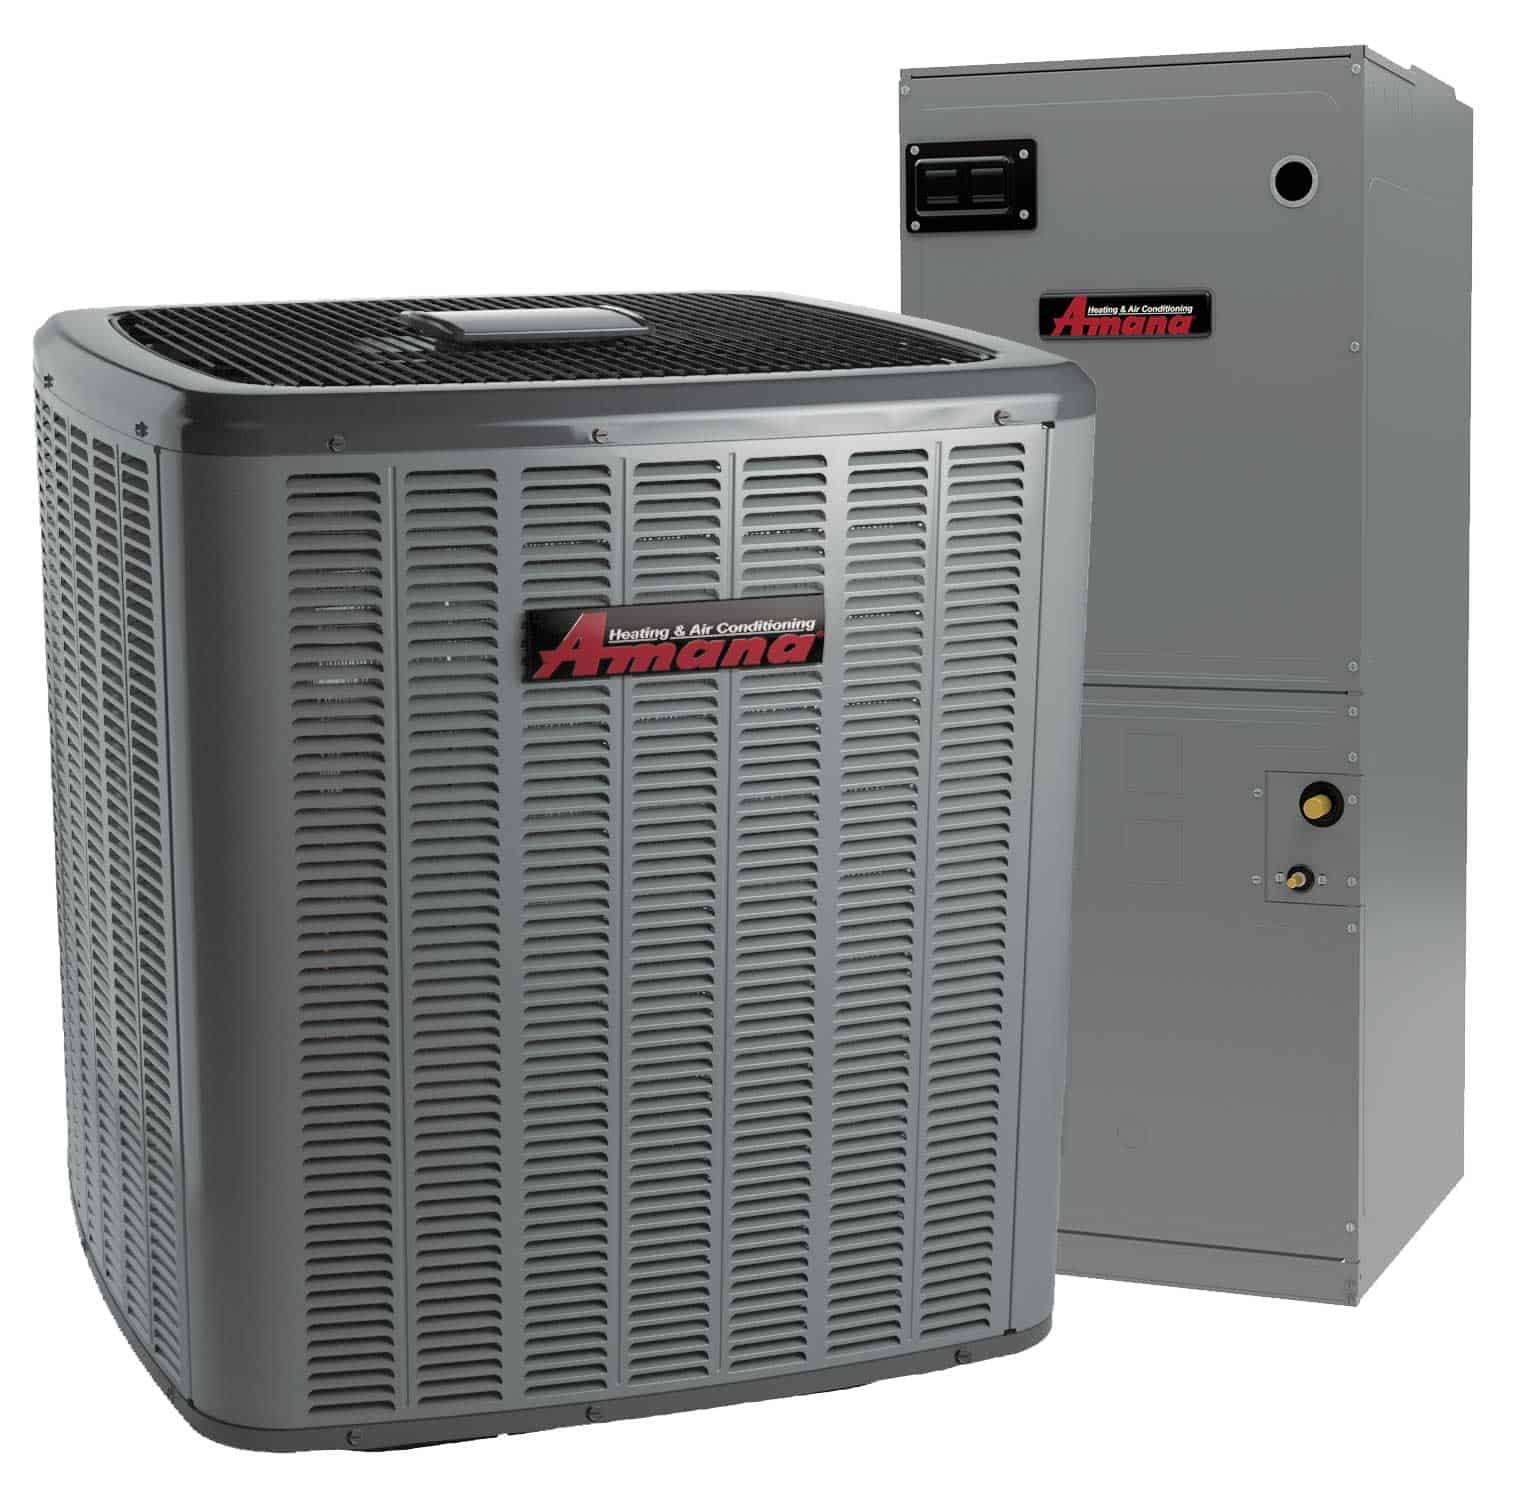 How Good is Amana Air Conditioner 